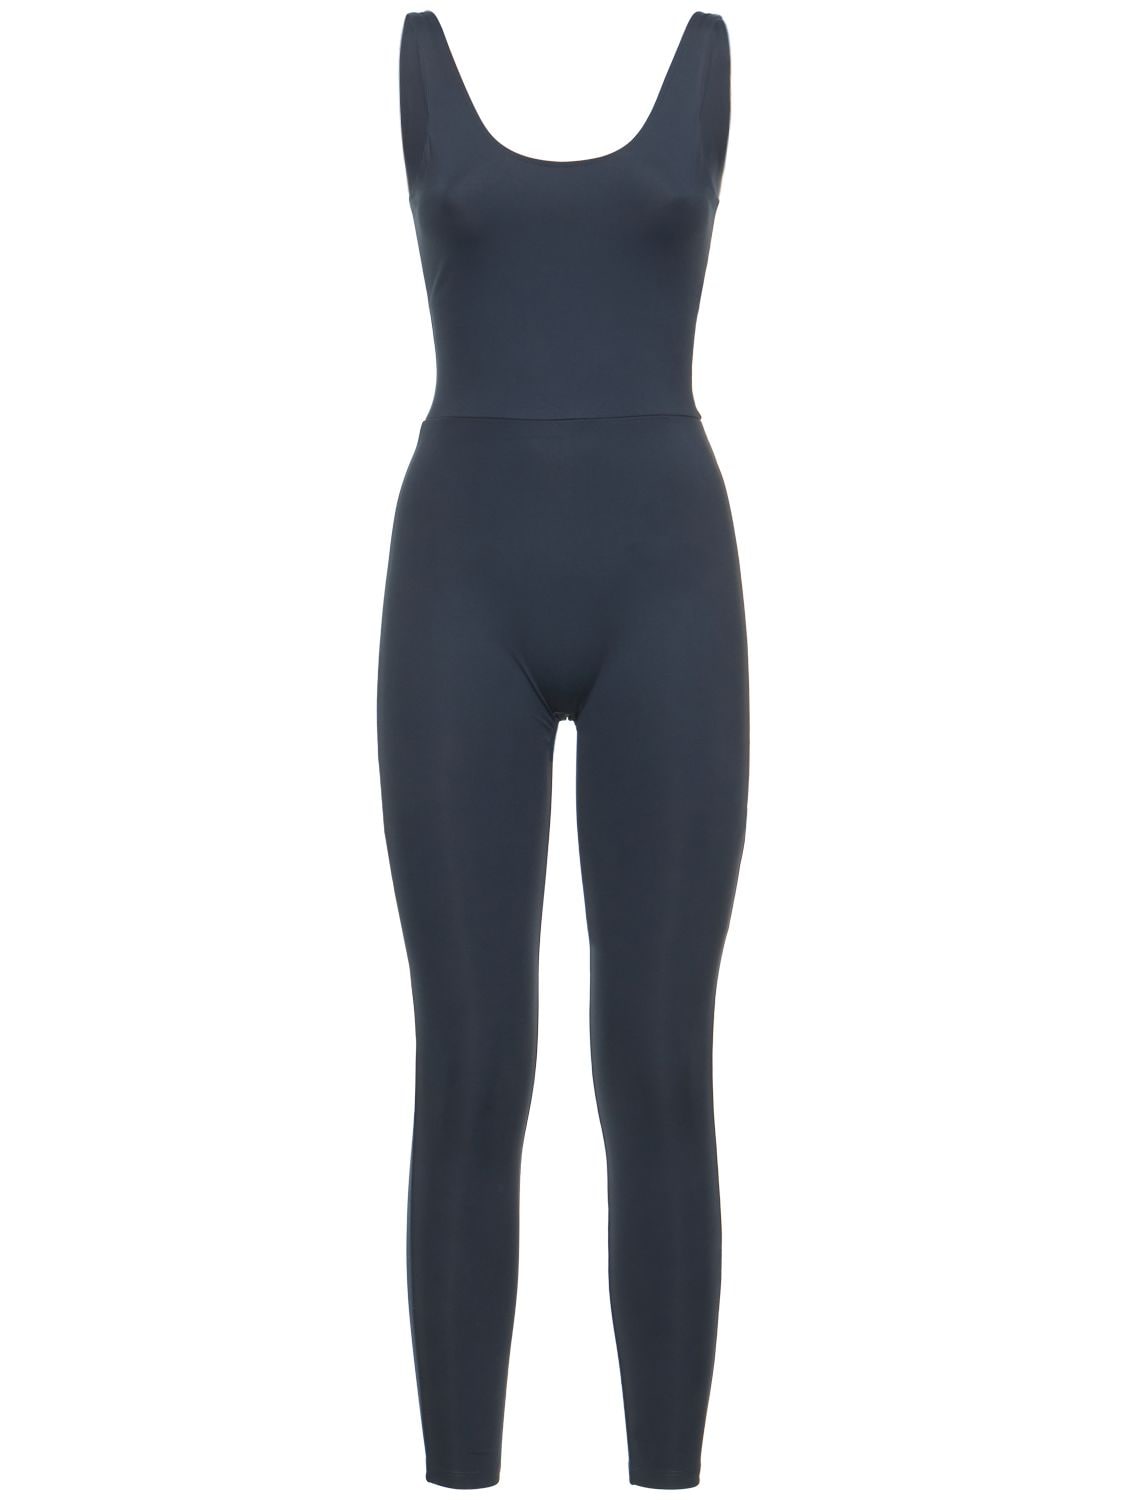 Image of The Scoop Back Seamless Unitard Jumpsuit